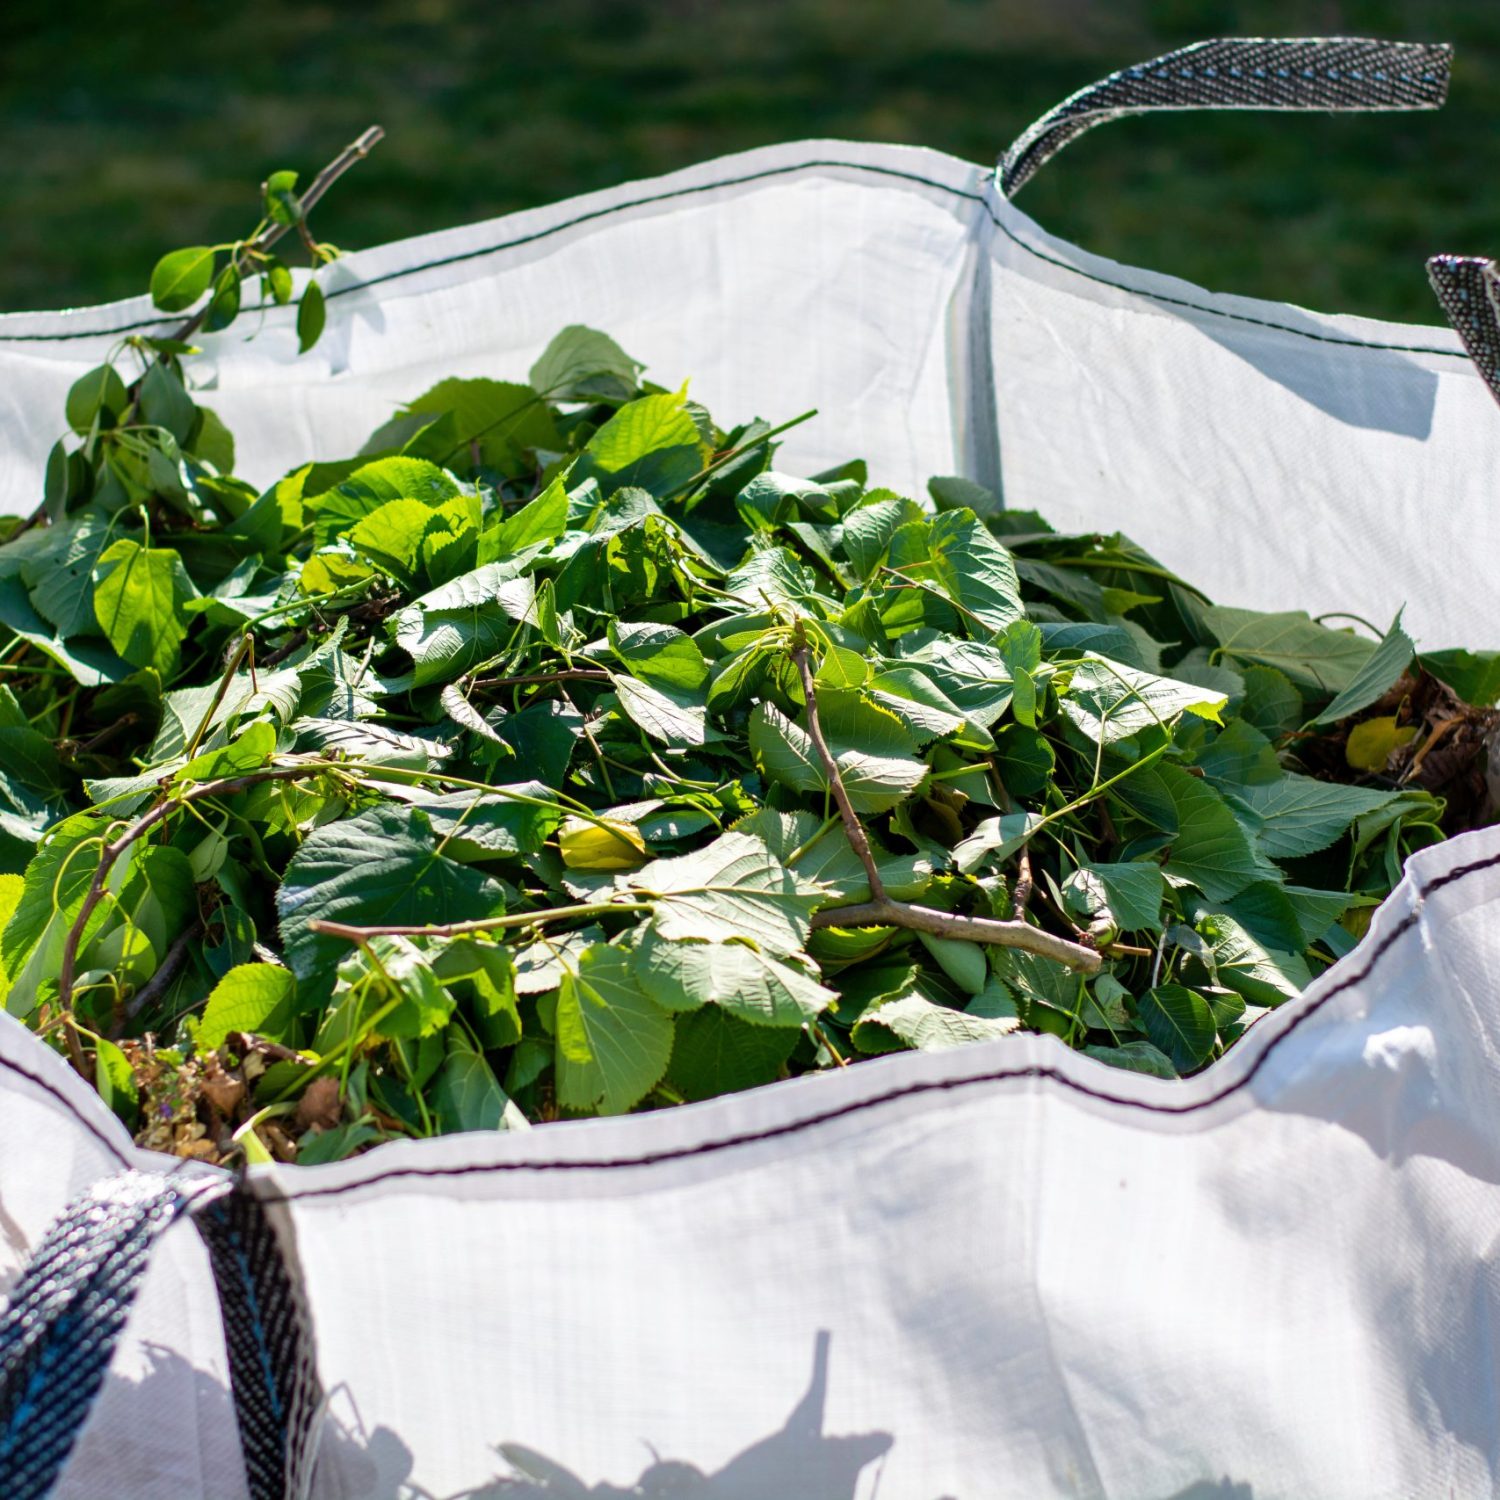 Large white rental bag with organic green garden waste. Local councils collecting green waste to process it into green energy and compost.